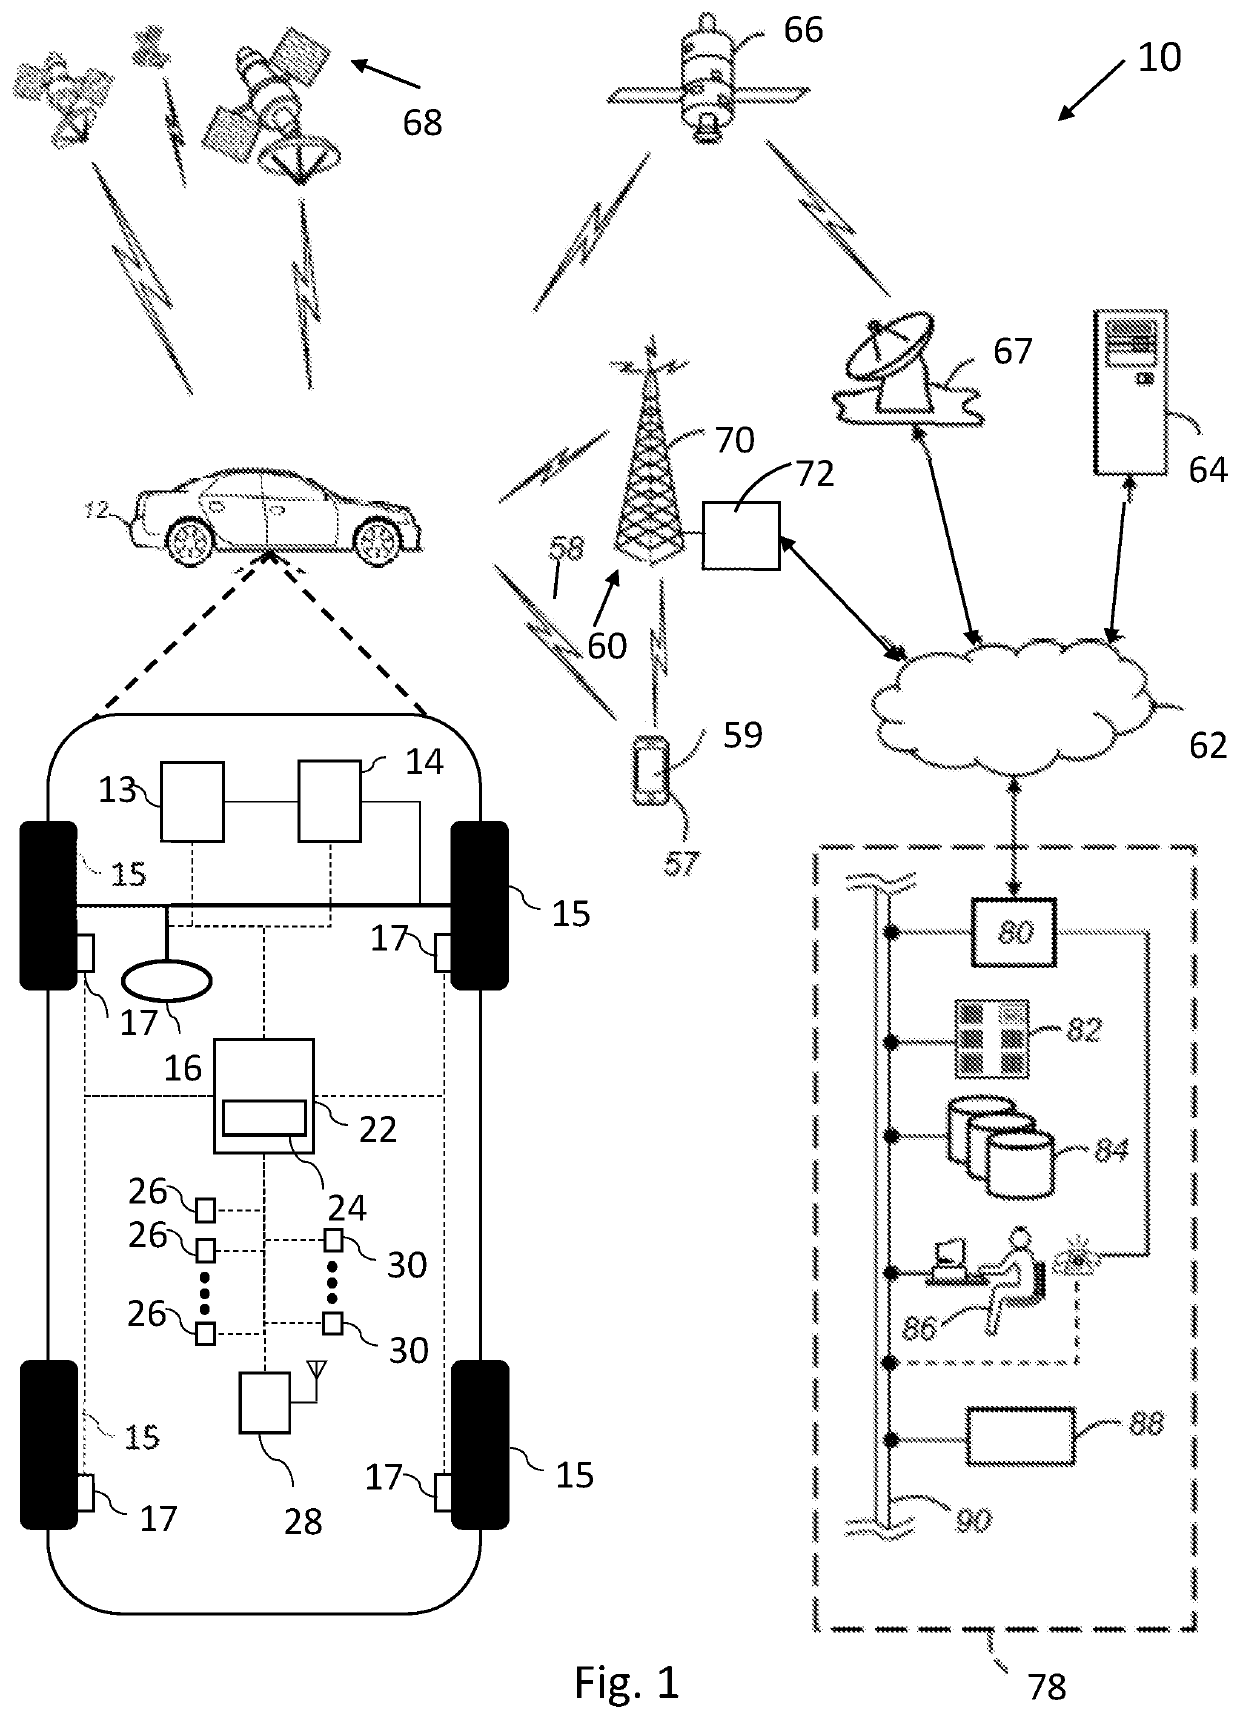 Method and apparatus for automatical rule learning for autonomous driving